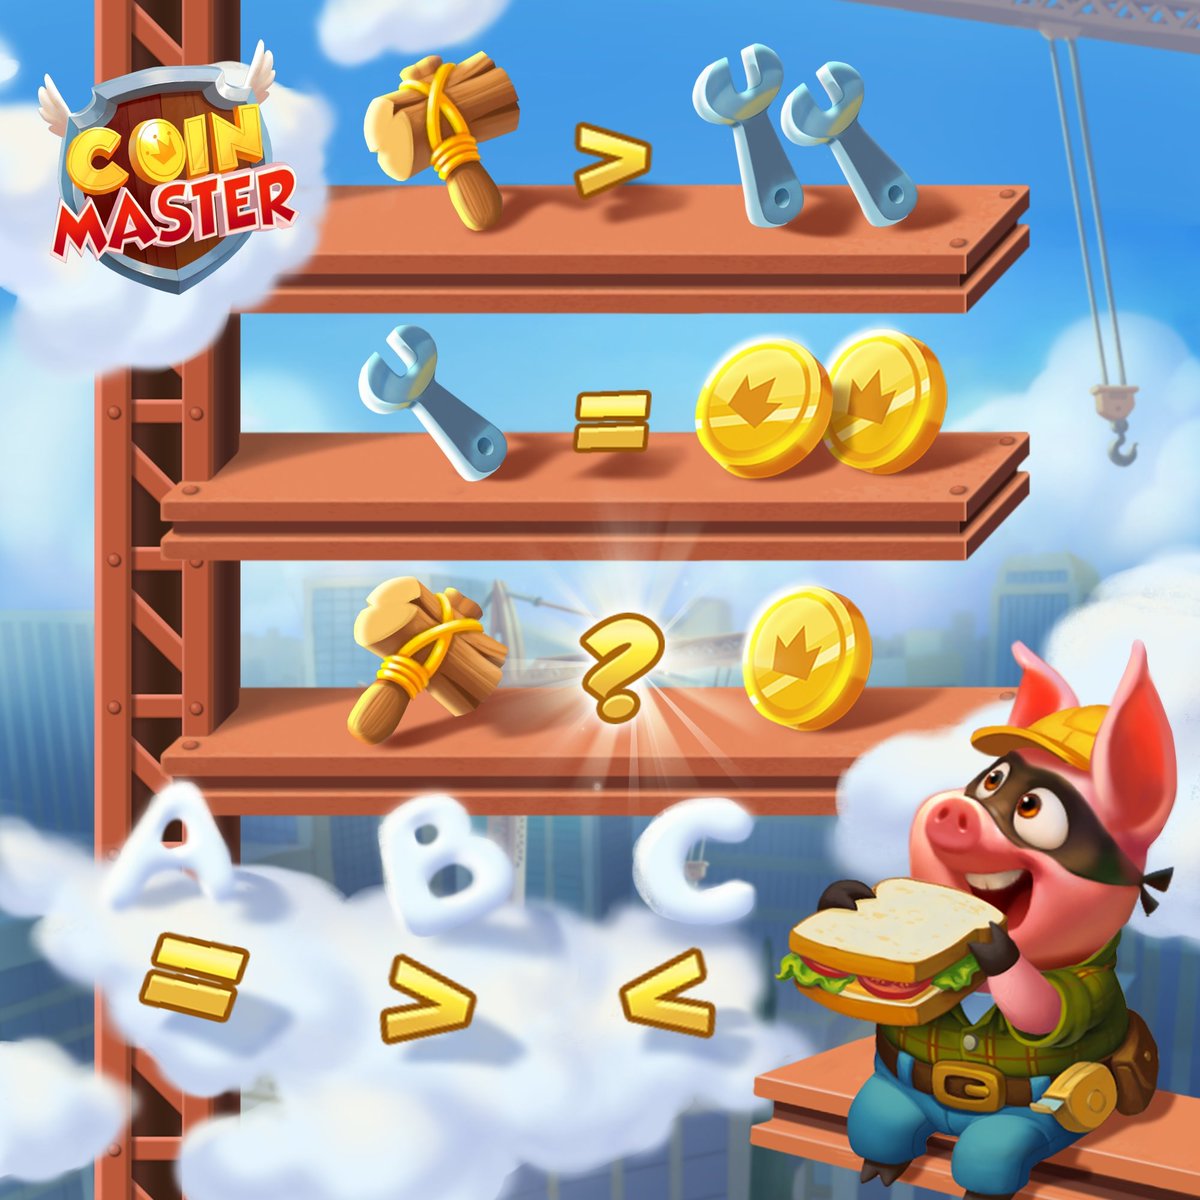 🍒Up to 3800 Spin Giveaway Today🎈

Follow those step
→Like
→Share
→Retweet
→Reply 'Spin'
Collect on👍 rb.gy/jj9wsi 

Respect rules⚠️
-
#coinmaster
#coinmasterfreespins
#coinmasterfreespin #coinmasterofficial #coinmasterGame #Italy #UK #Germany #USA #Texas #Poland